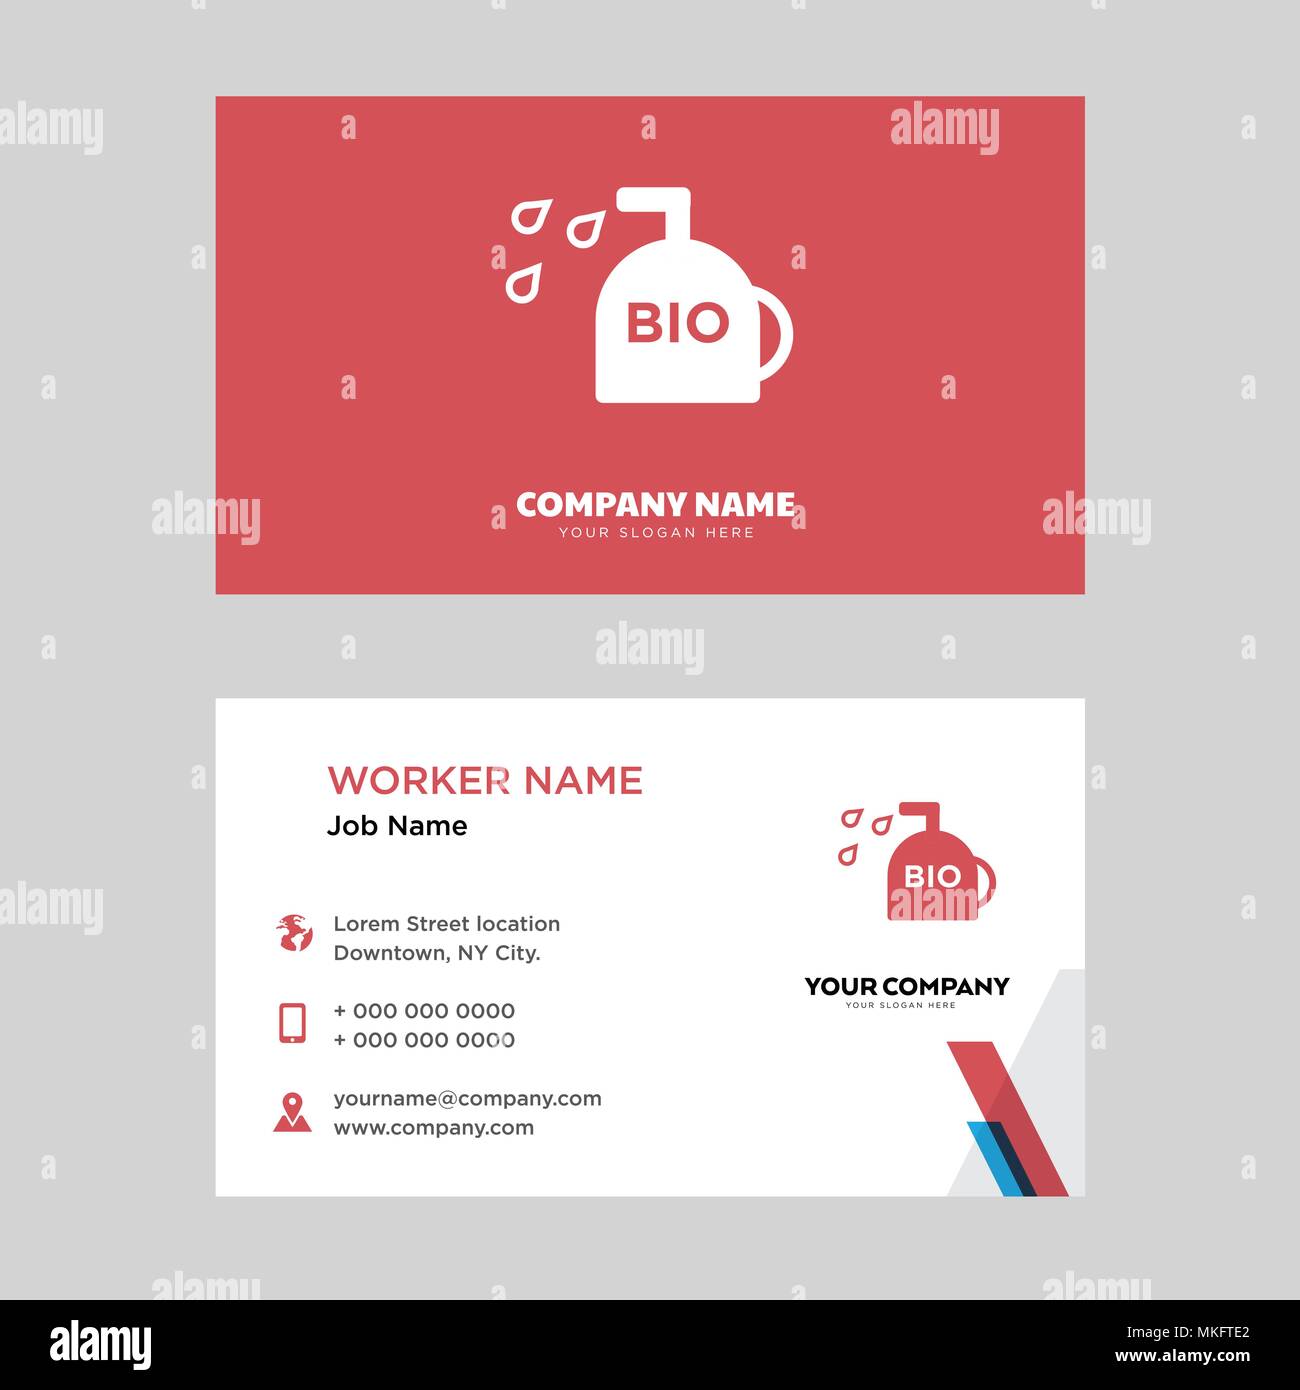 Biodiesel business card design template, Visiting for your company Pertaining To Bio Card Template